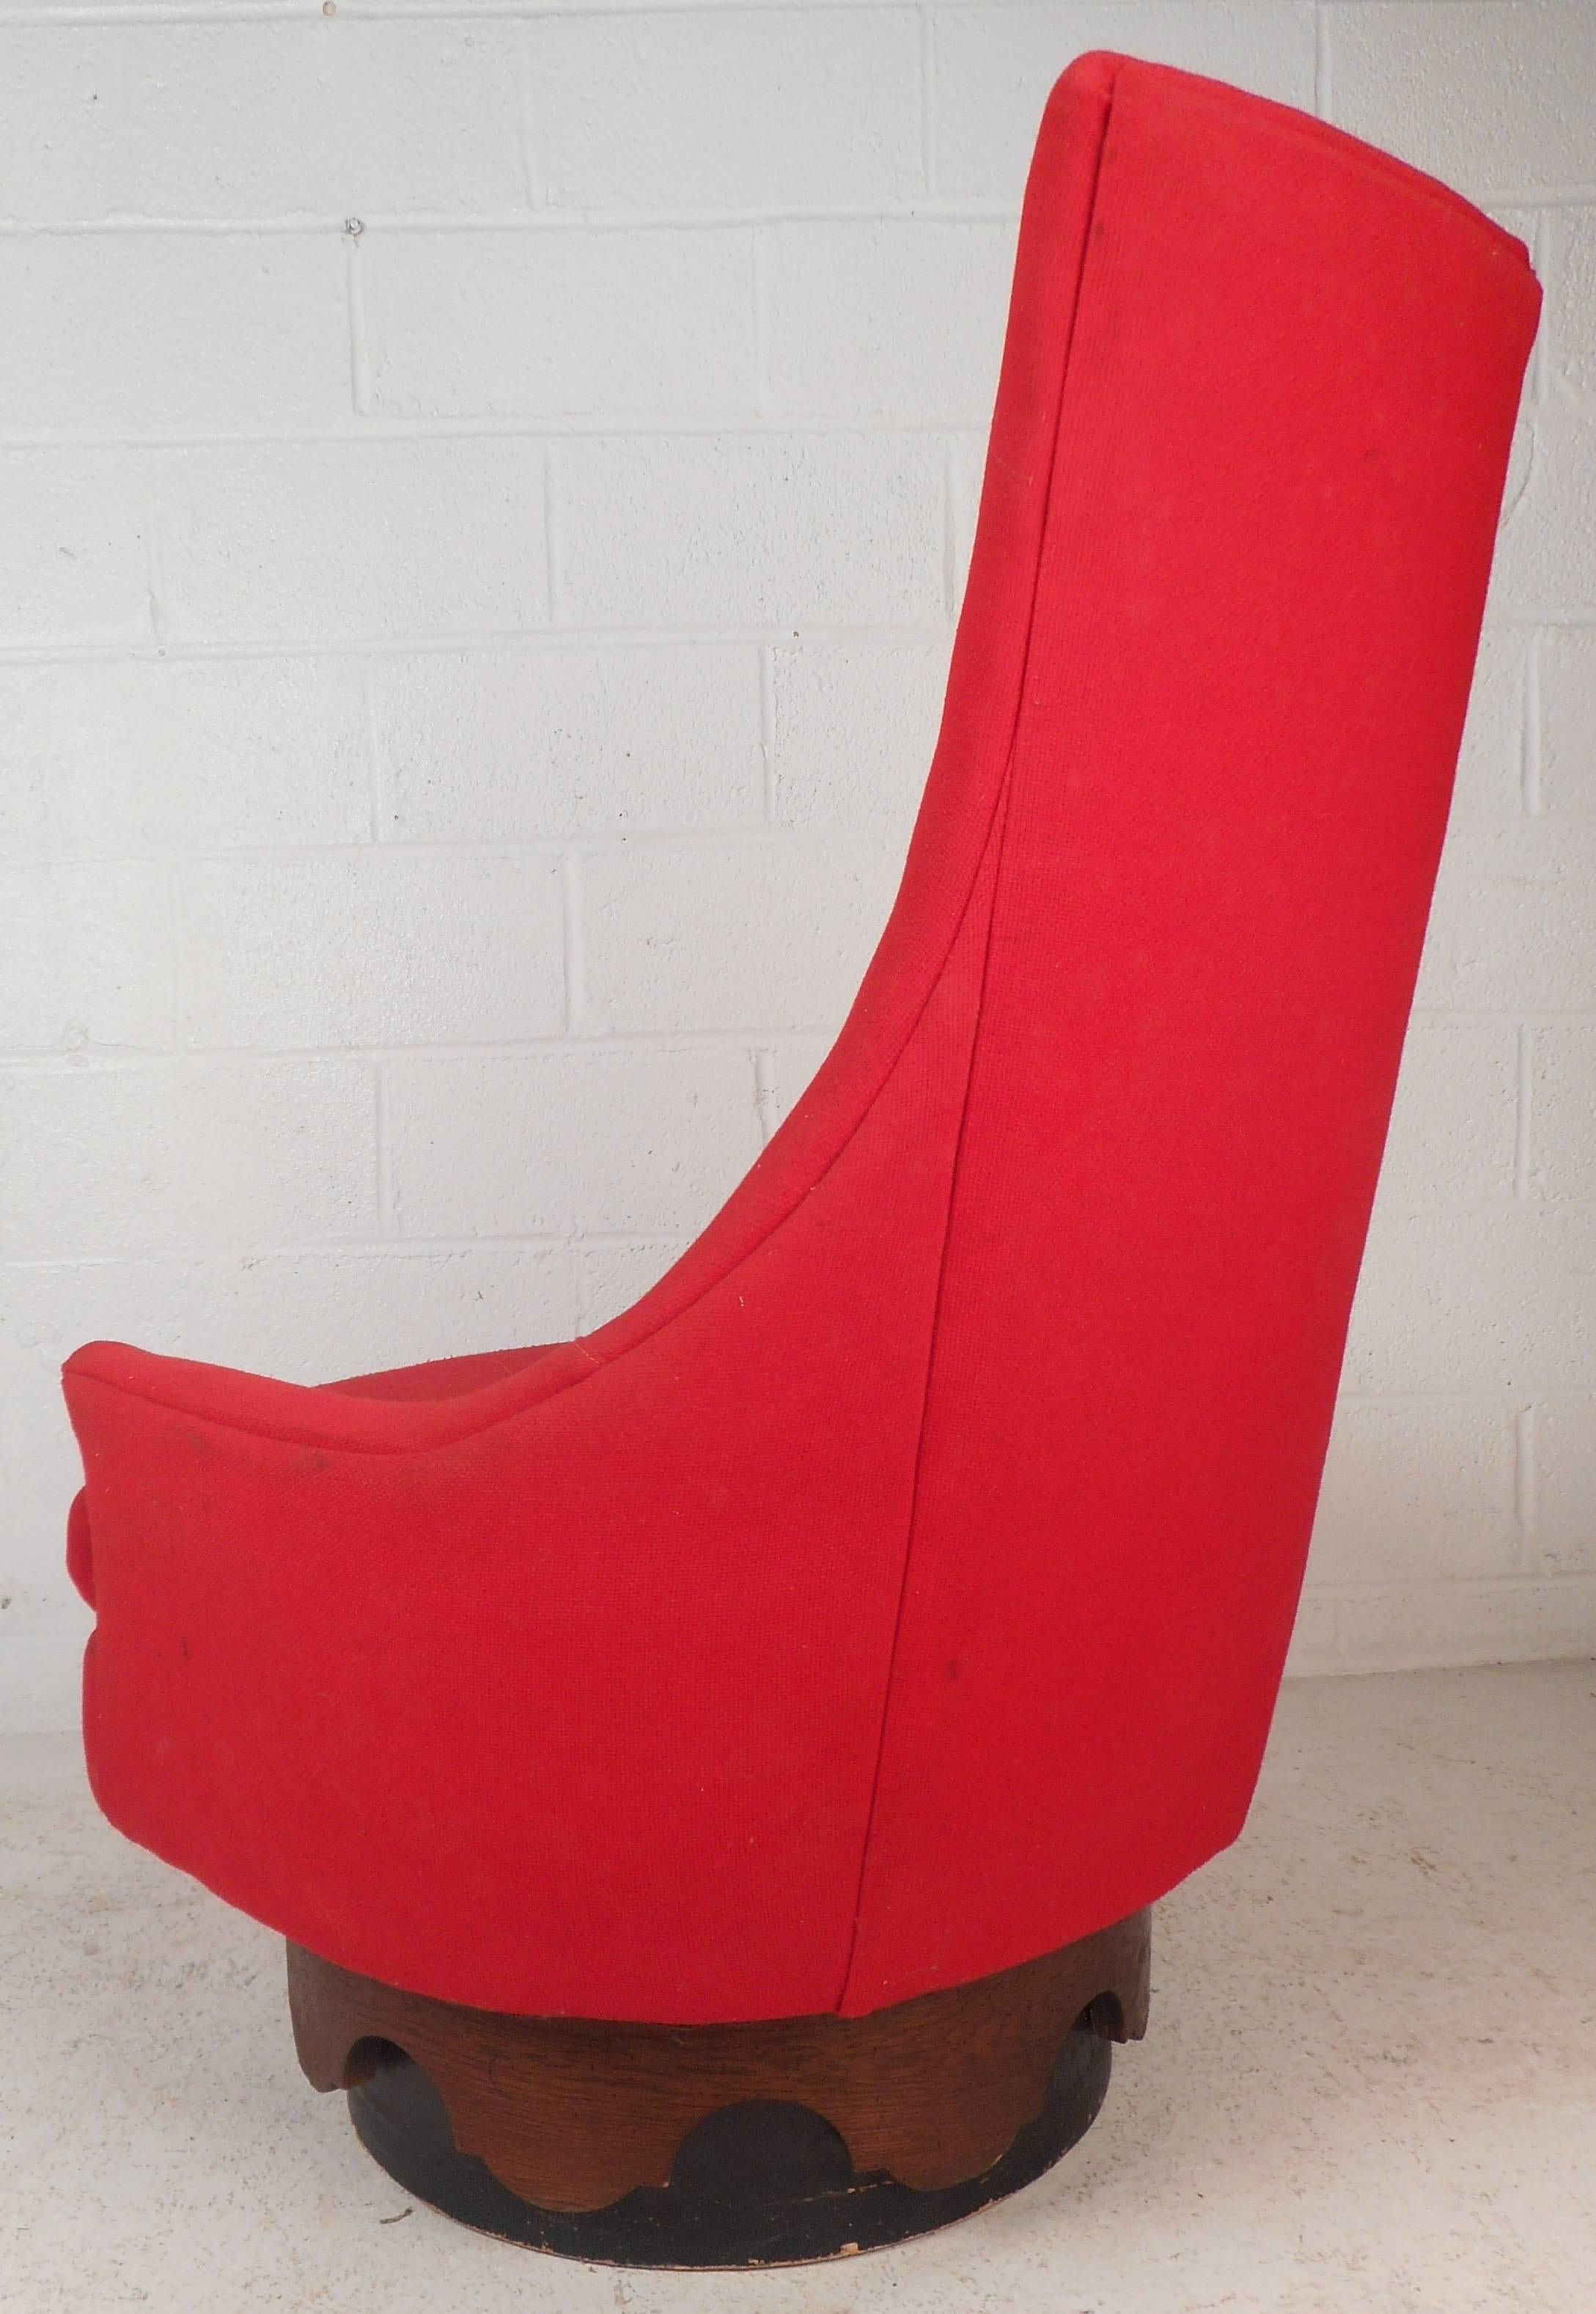 Beautiful vintage modern lounge chair features an unusual high tufted backrest with a sculpted walnut design on the base. Stylish design offers the ability to swivel and is covered in an elegant red upholstery. This wonderful Mid-Century lounge